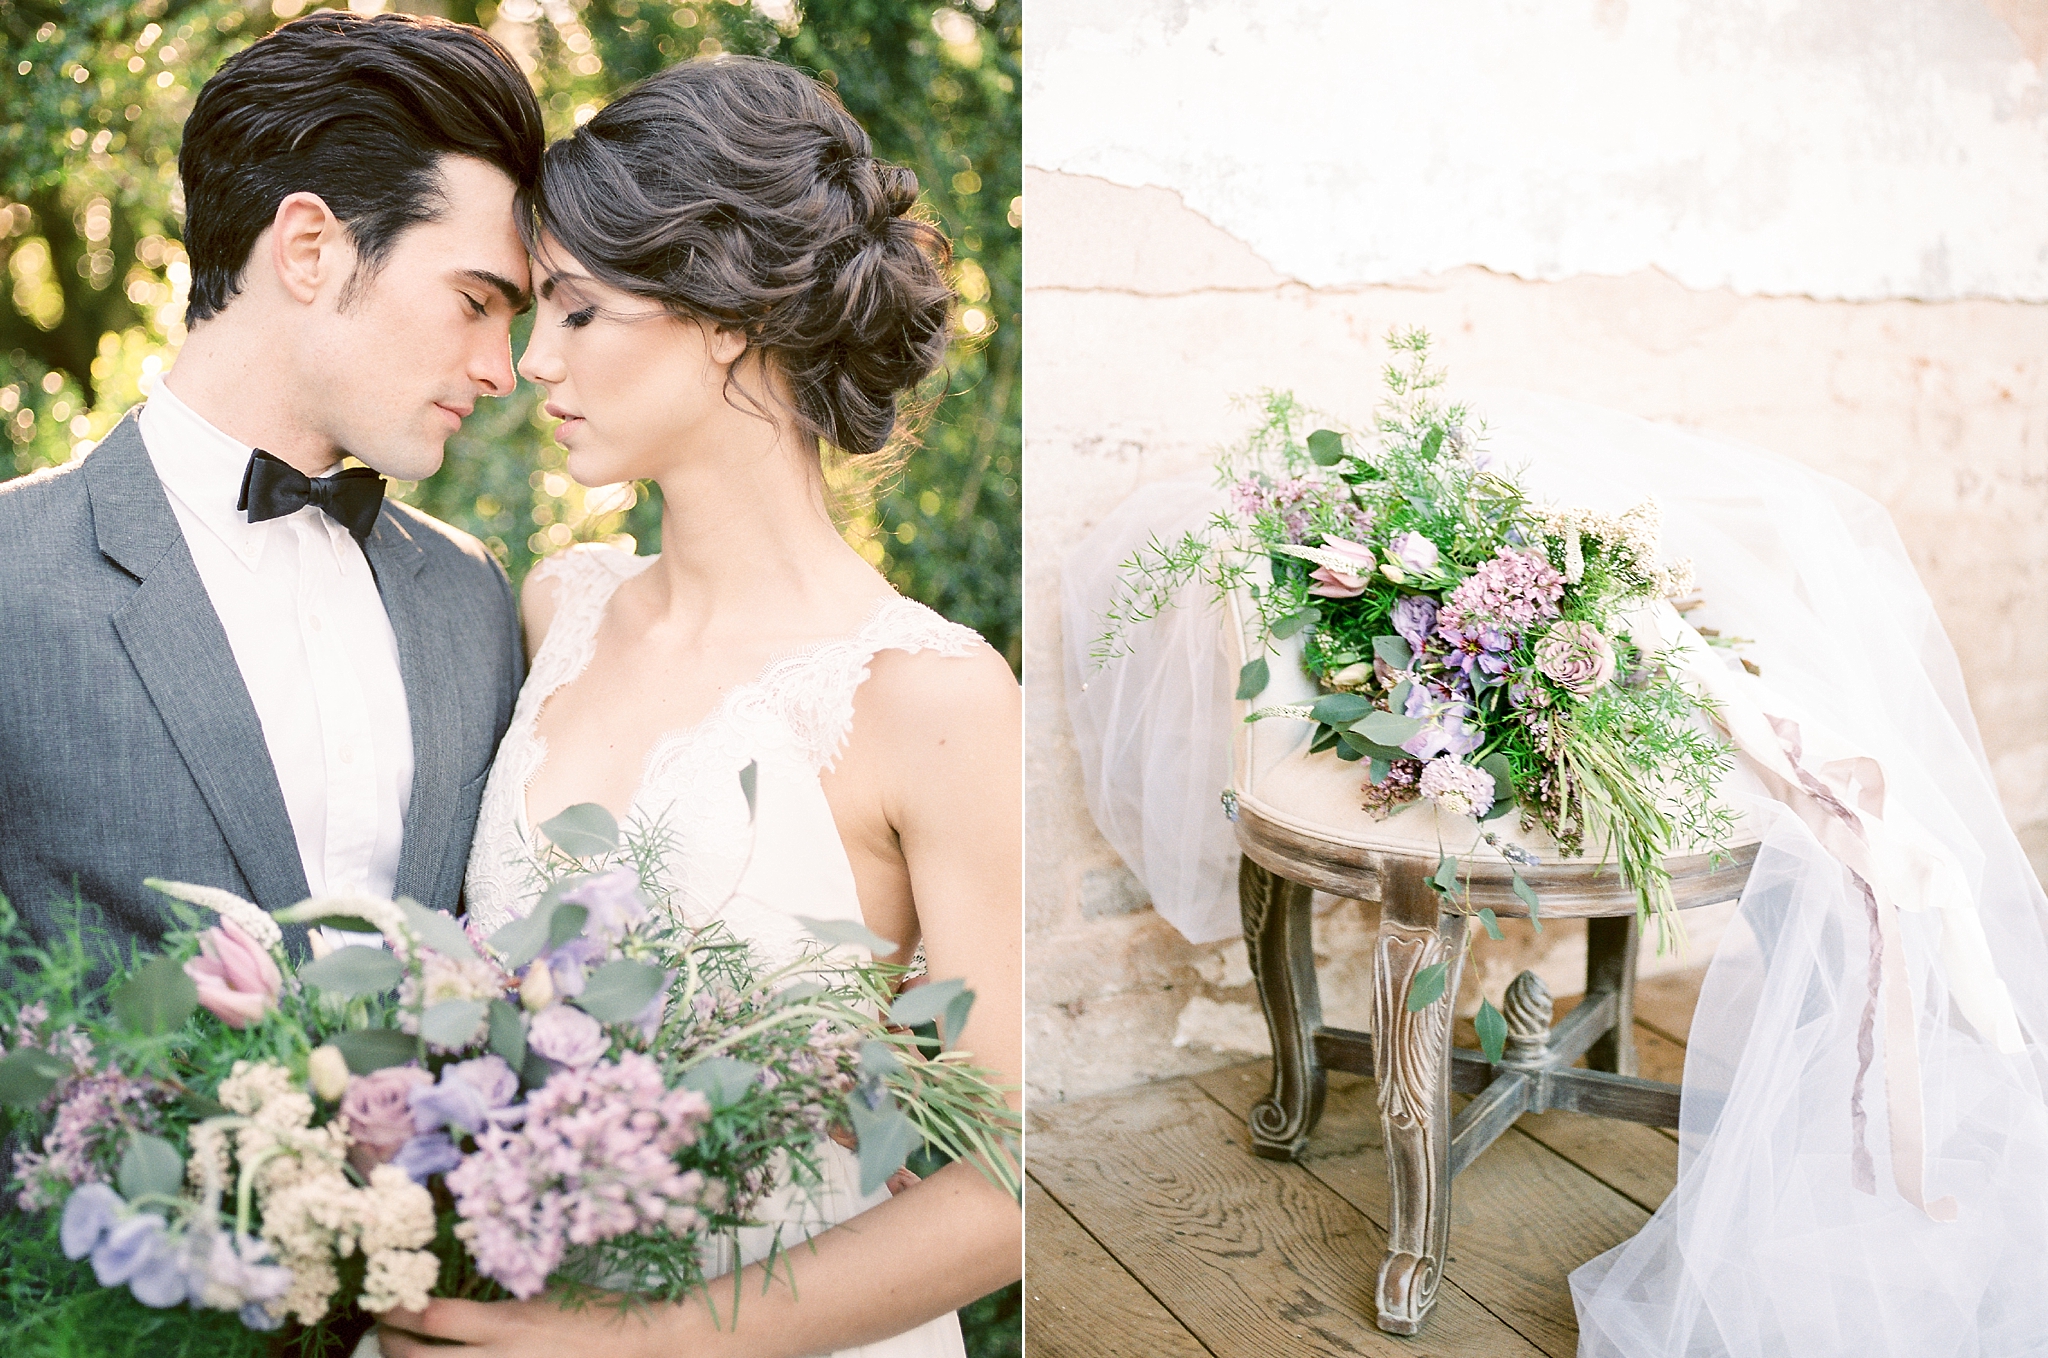 Not all bridal bouquets are created equal! This Washington, DC wedding photographer shares 5 tips on how to ensure yours is perfect for the big day.